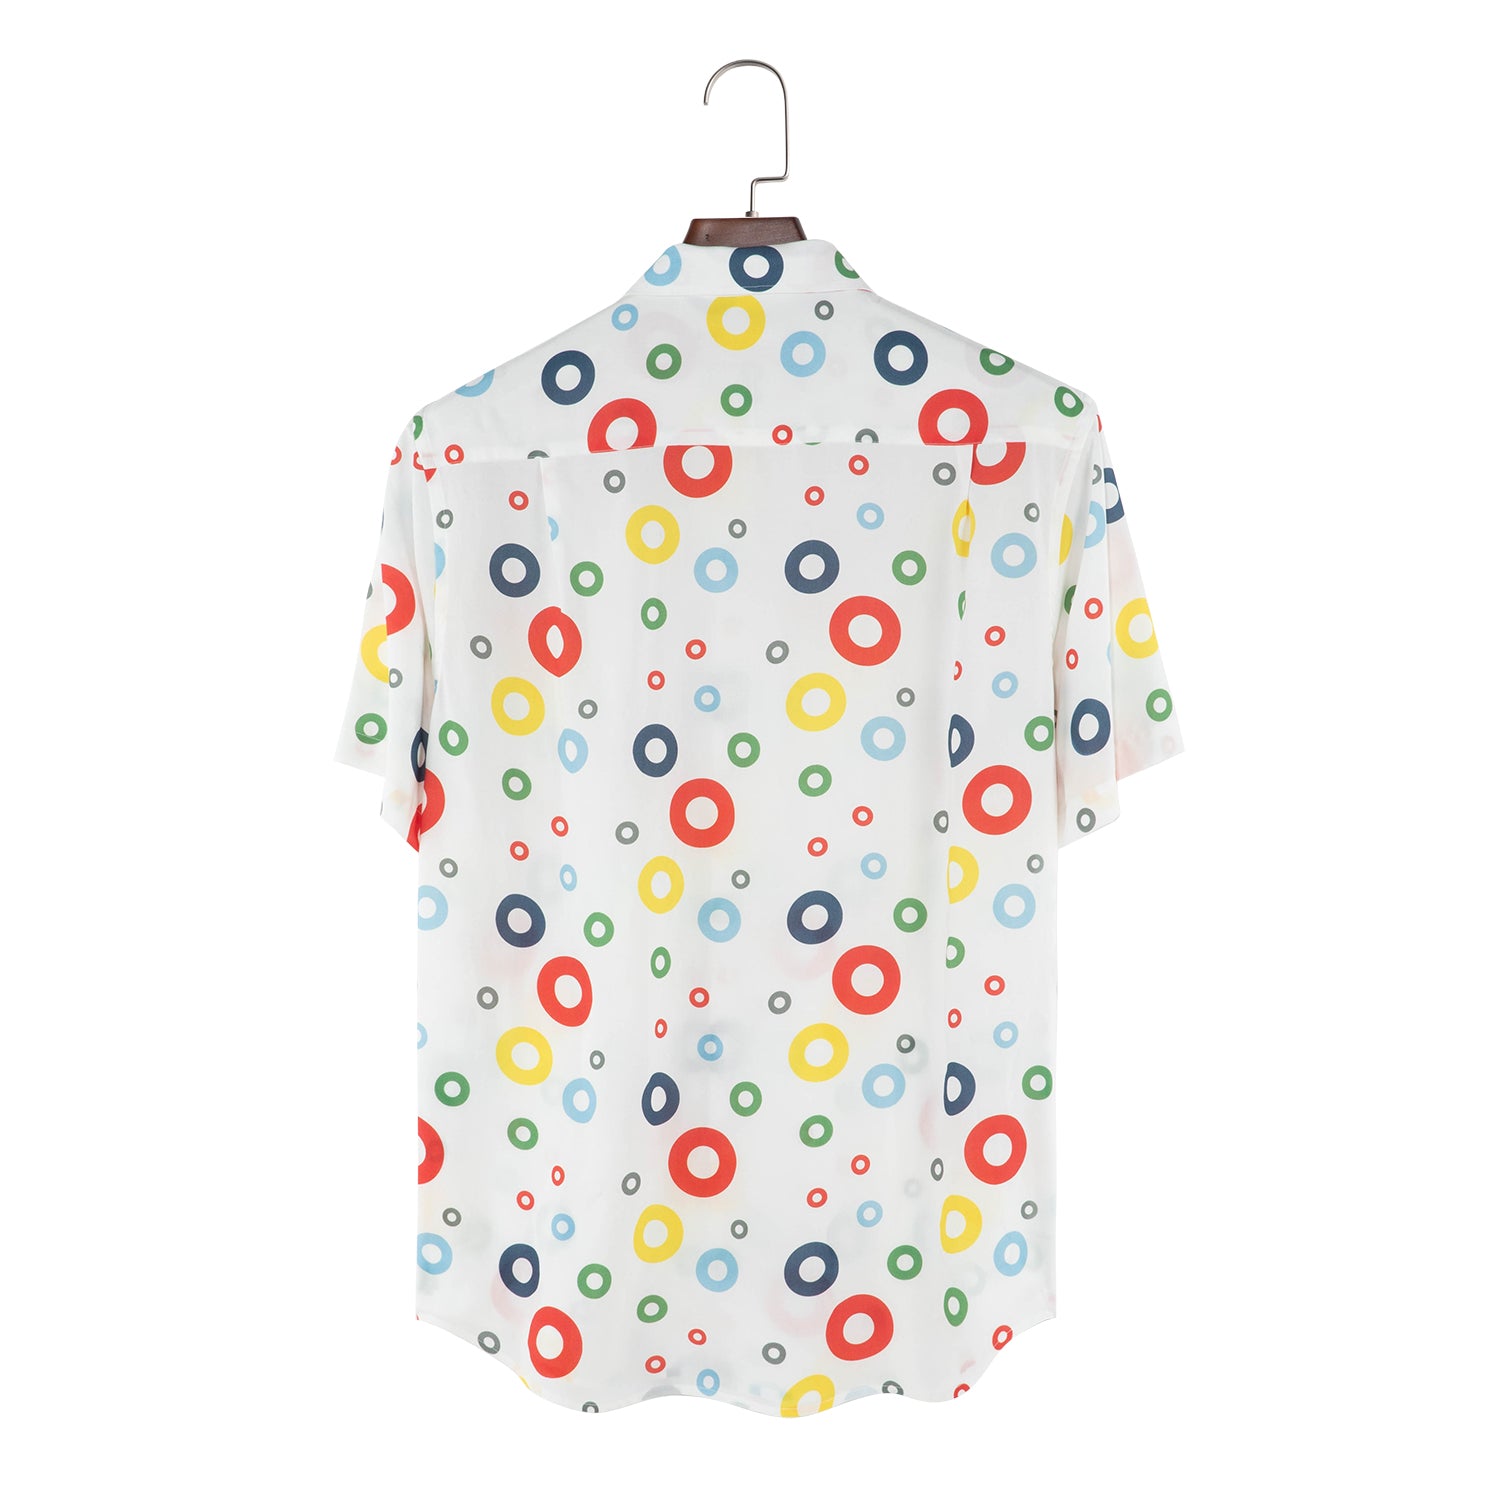 Phish Relaxed Short Sleeve Button Down Donut All Over White - Section 119